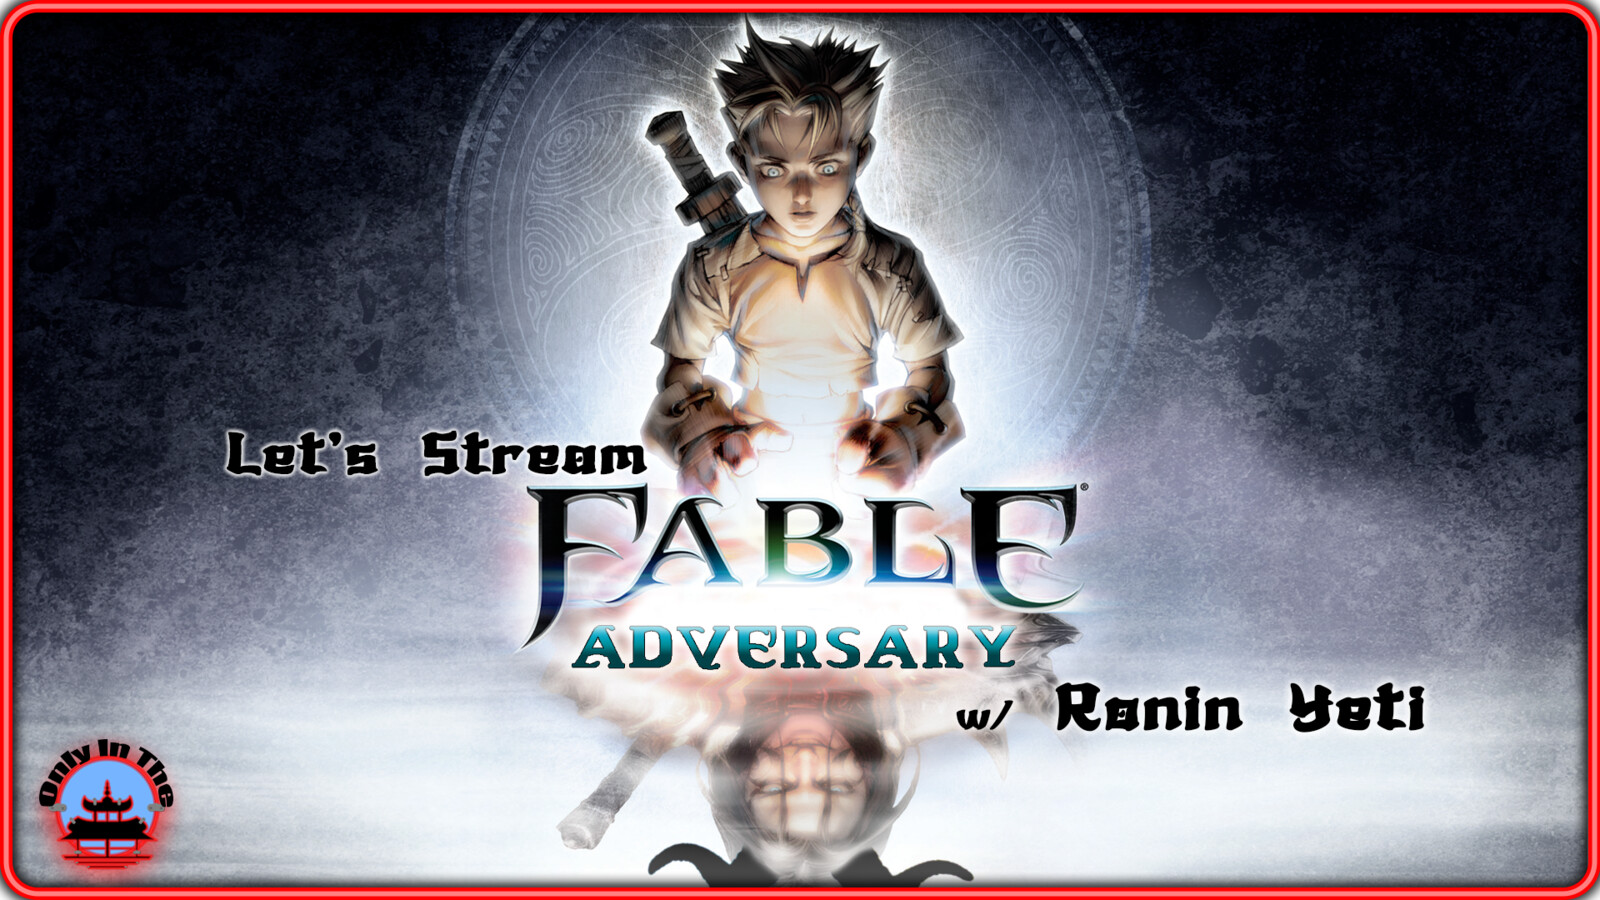 Let's Stream "Fable: Adversary" Default Image | Ronin Yeti Twitch Streaming